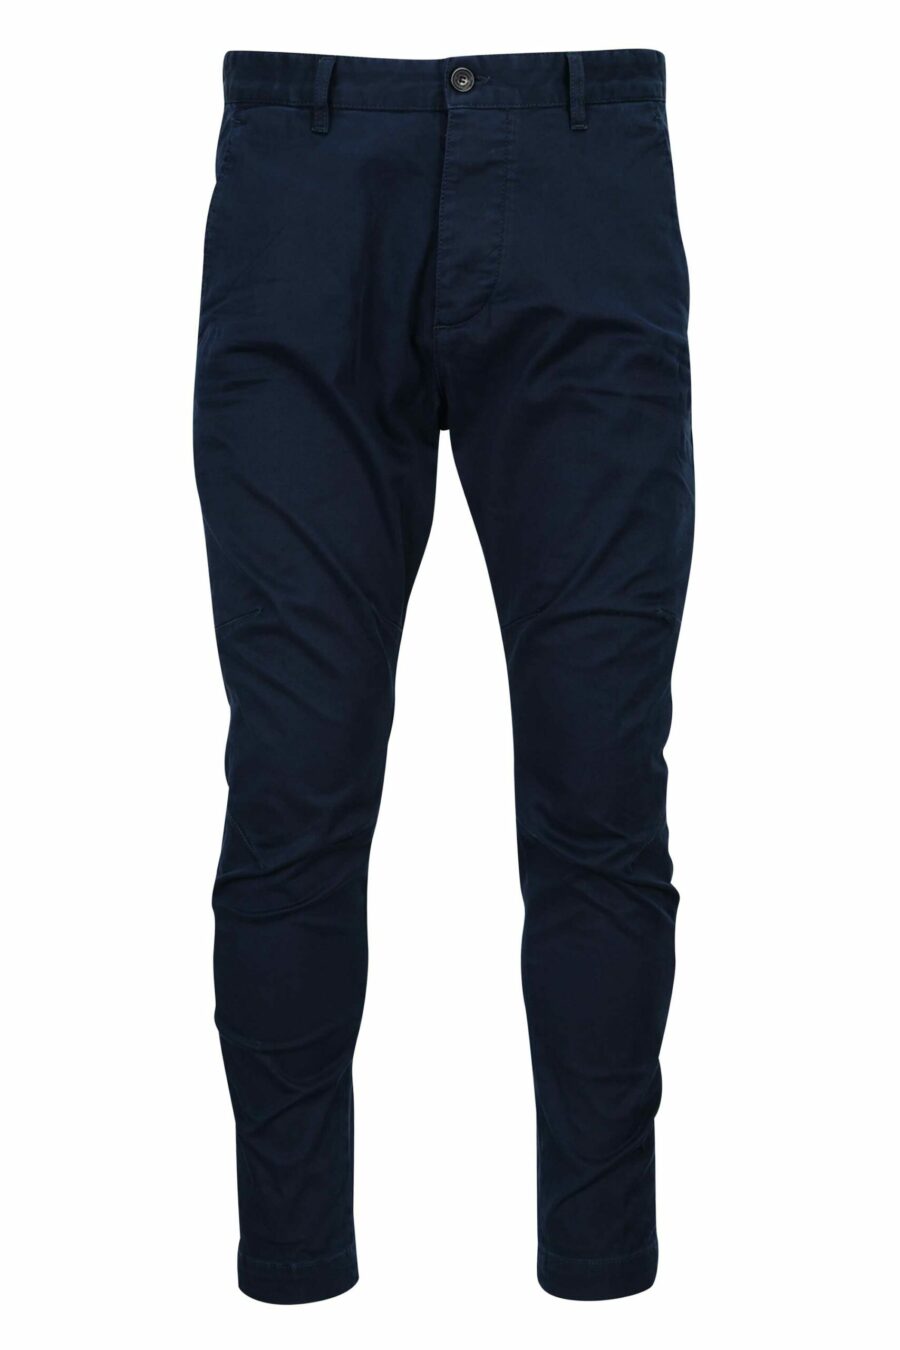 Sexy chino trousers dark blue - 8052134973431 scaled